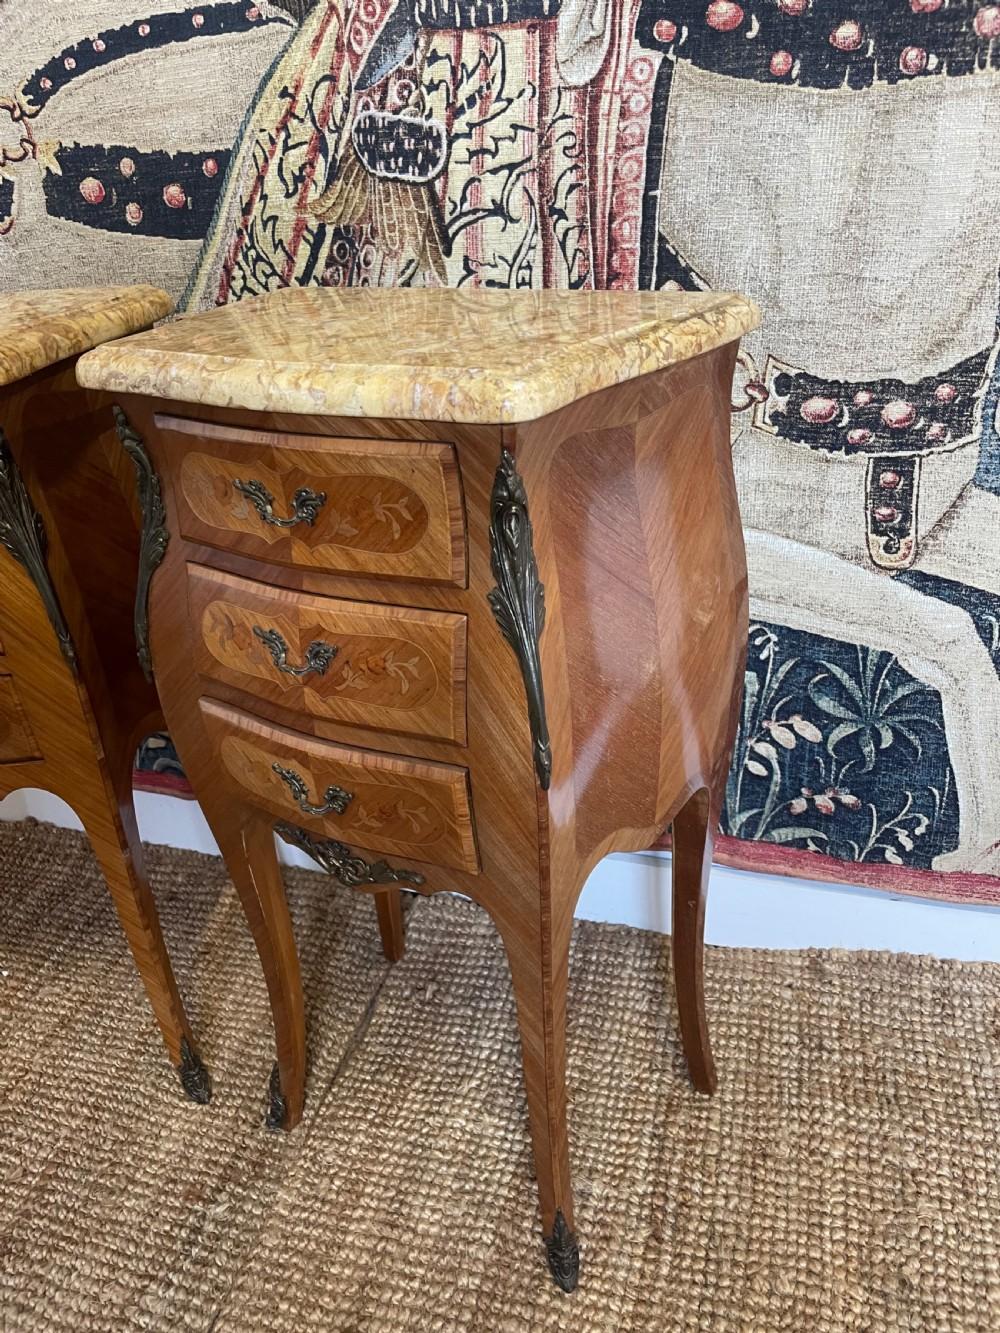 Early 19th century painted walnut small commode/chest of drawers.
French Circa 1820’s.With lovely brass handles and a dark distressed paint finish.
Height 32.5 inches or 82.5 cms
Width 39.5 inches or 100 cms
Depth 18.5 inches or 47 cms